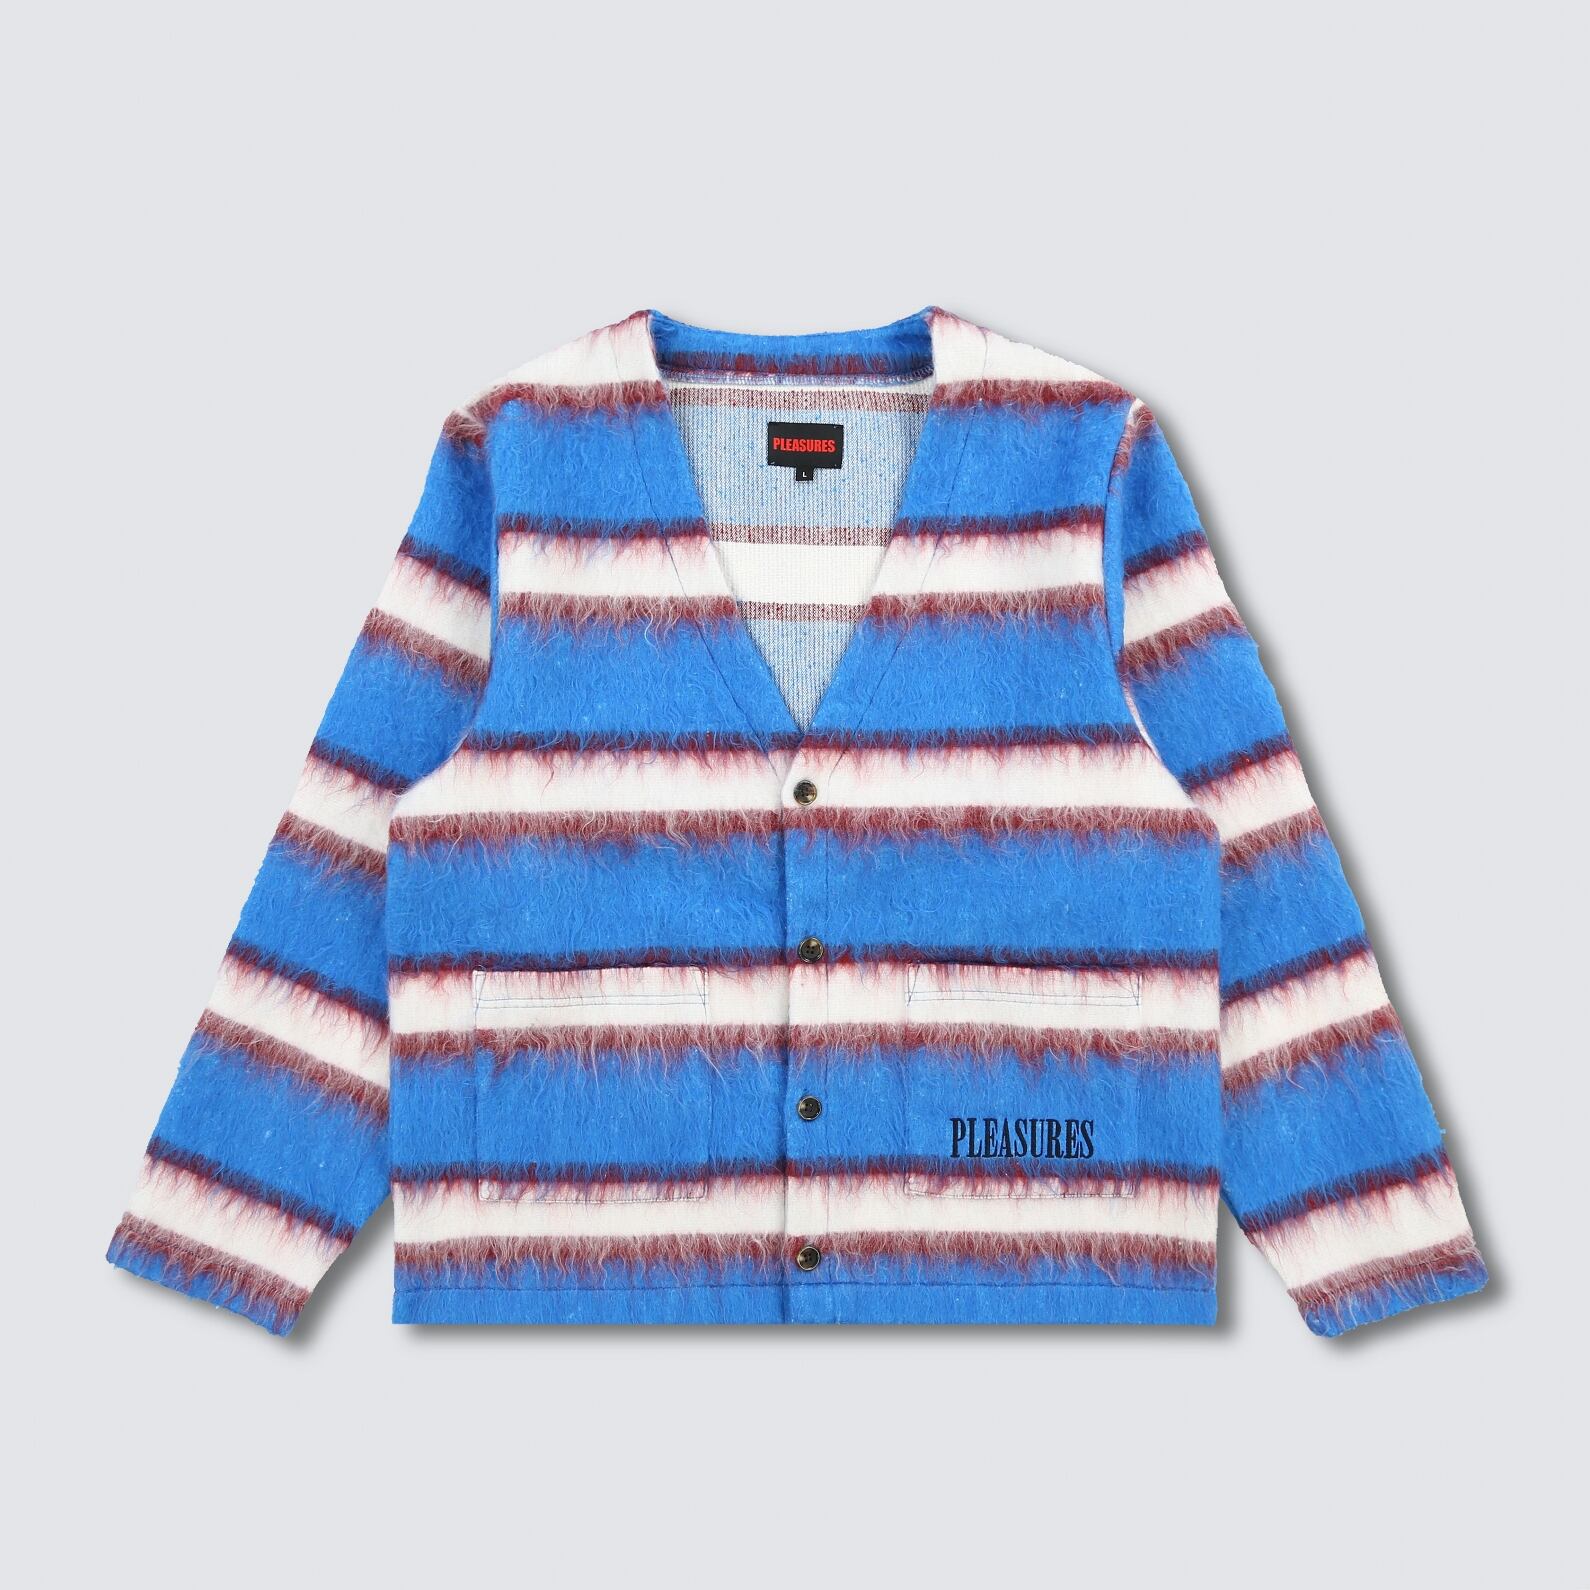 【PLEASURES/プレジャーズ】STACK CARDIGAN カーディガン / BLUE / HOL23-11948 | AnKnOWn LAB  powered by BASE